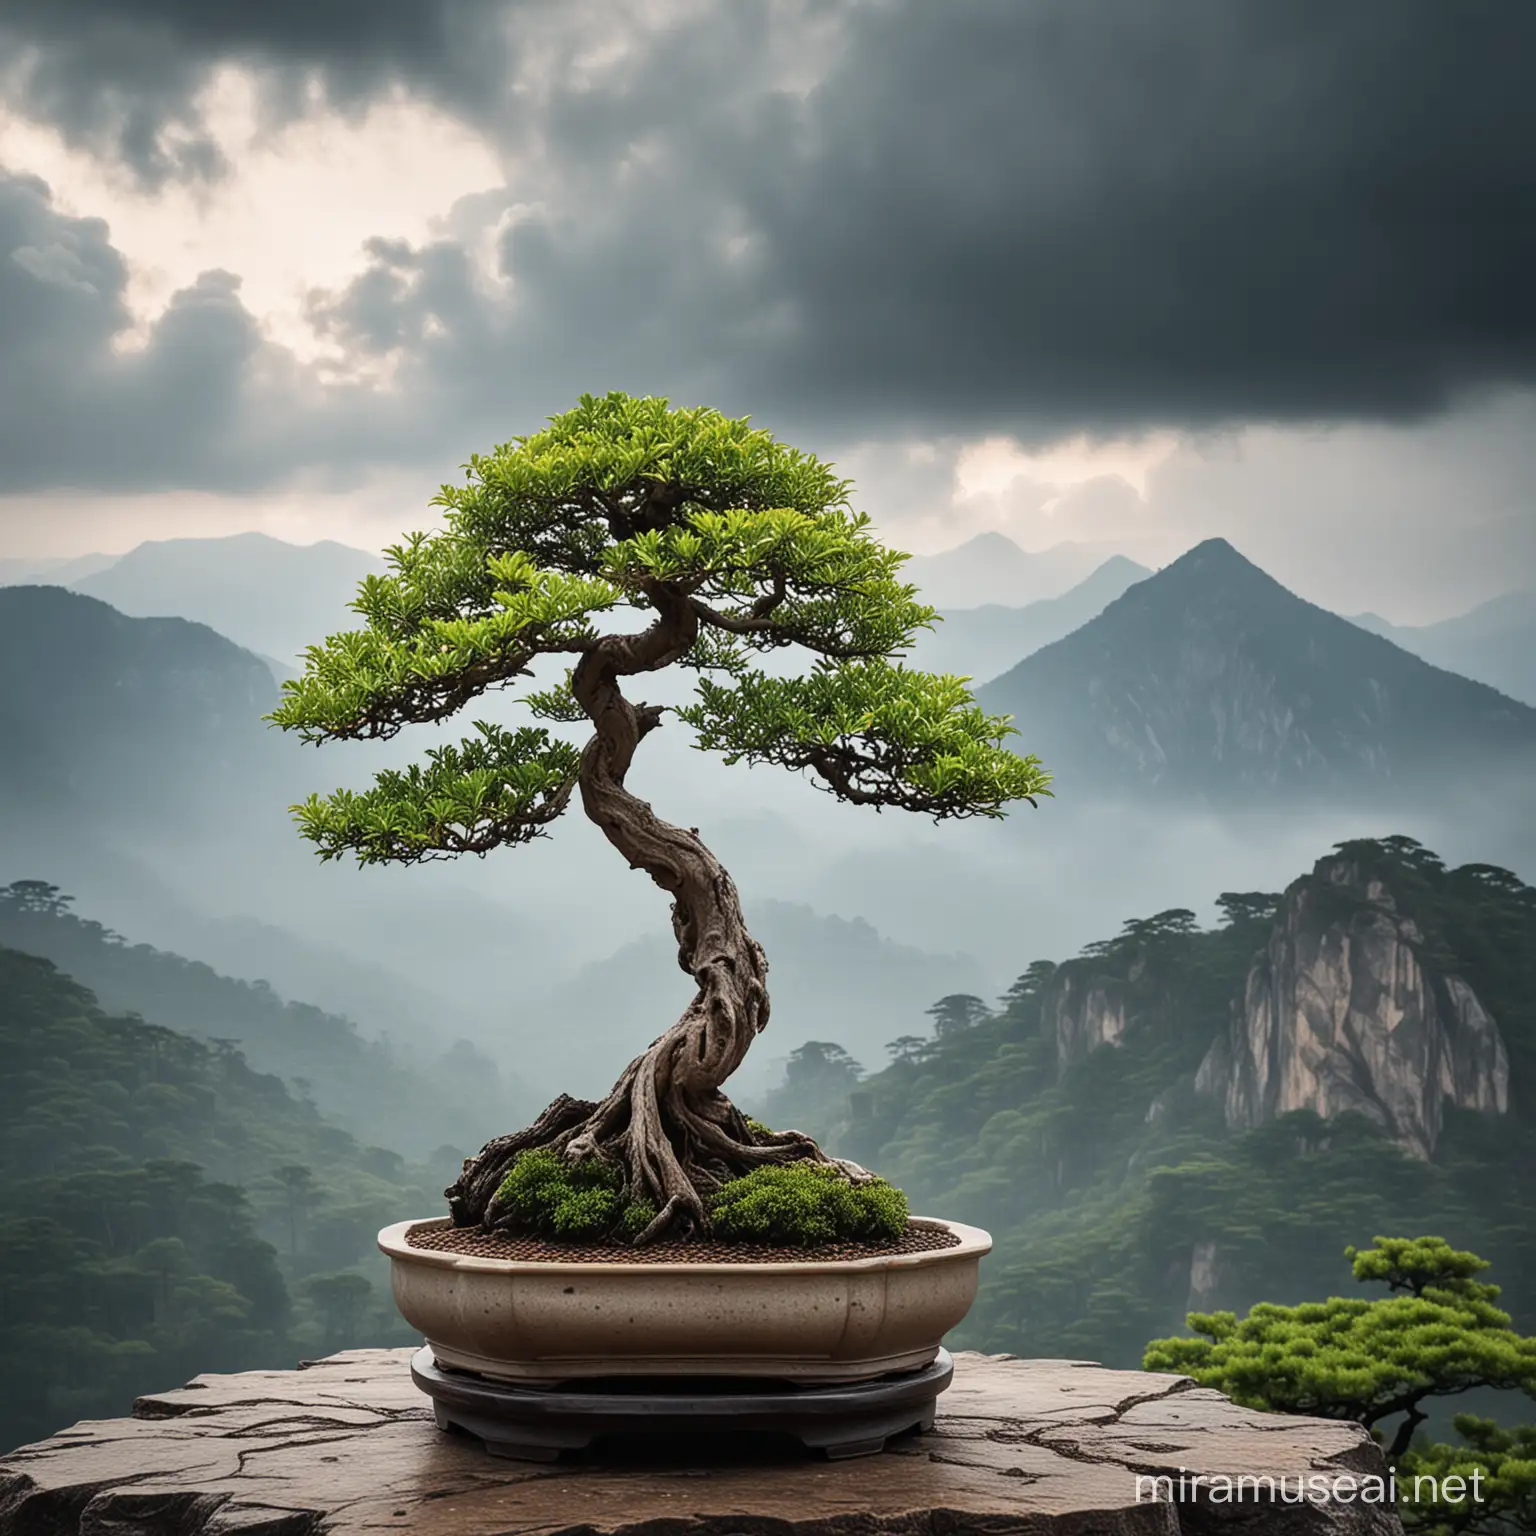 bonsai tree, mystic cloudy 
background over Moutain